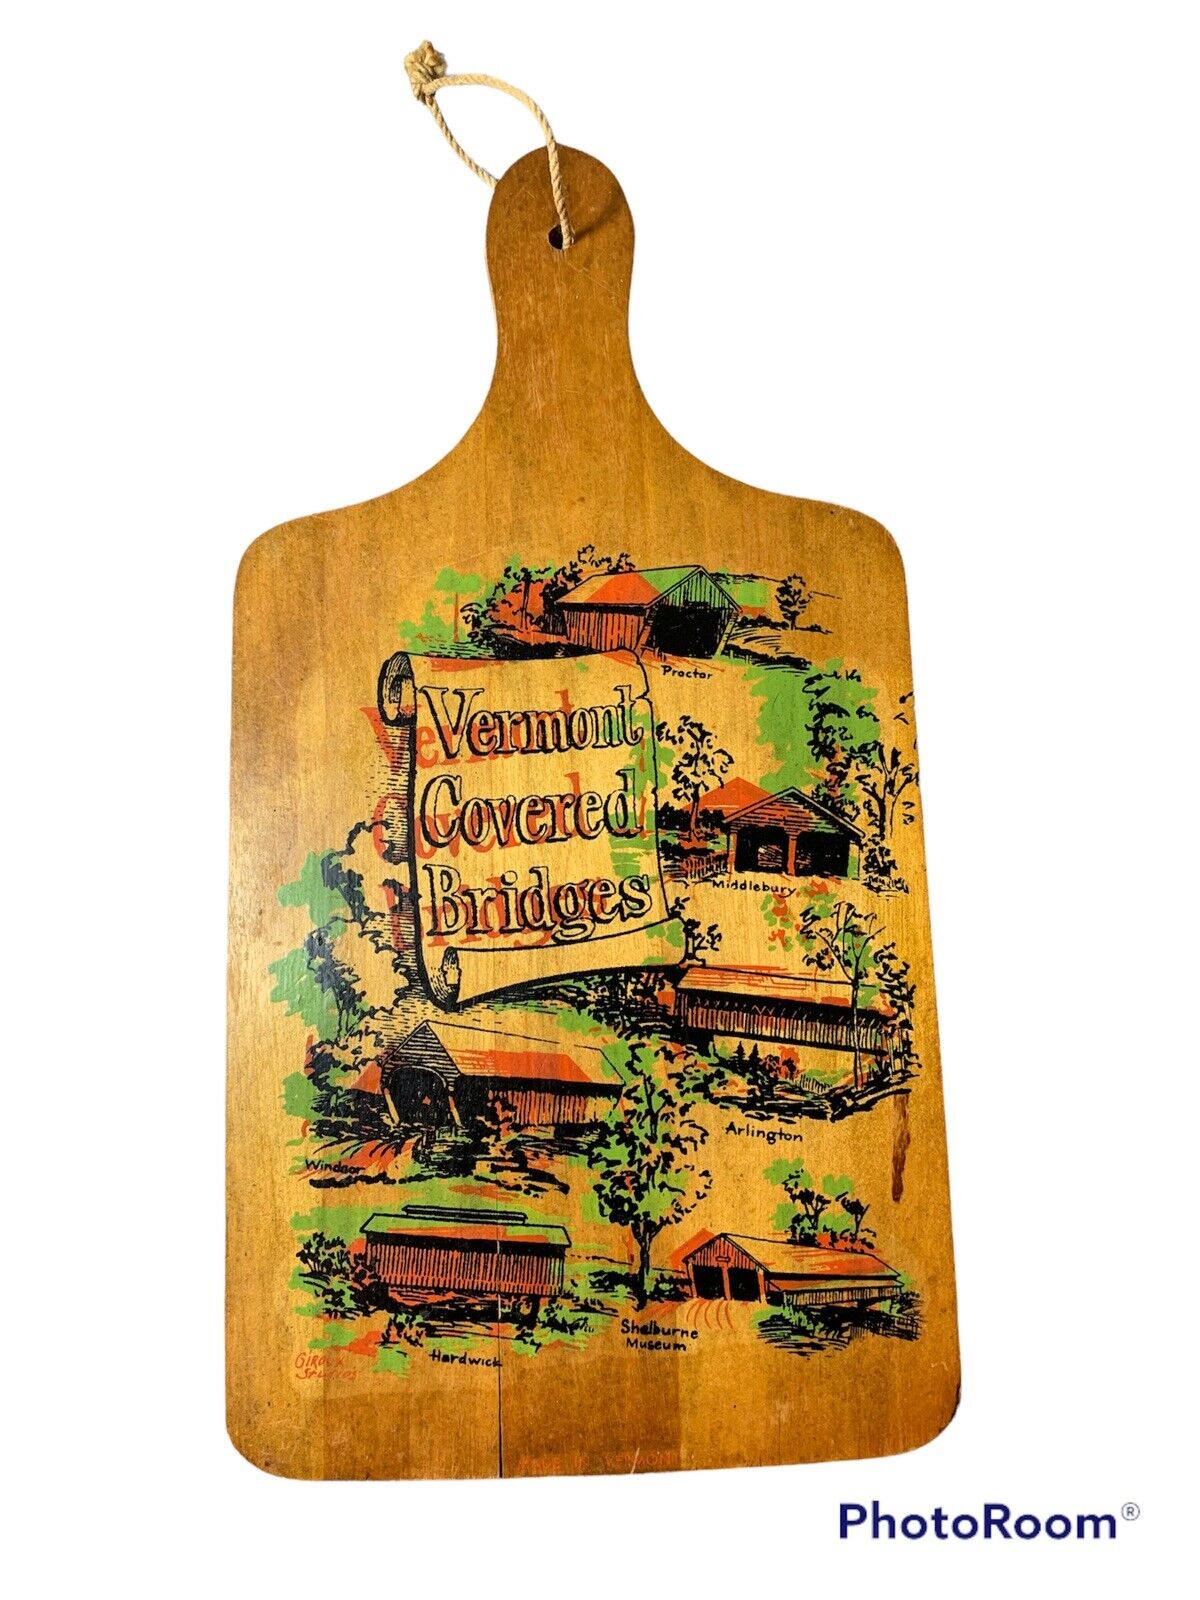 Vermont Covered Bridges Decorative Cutting Board Wall Hanging Decor